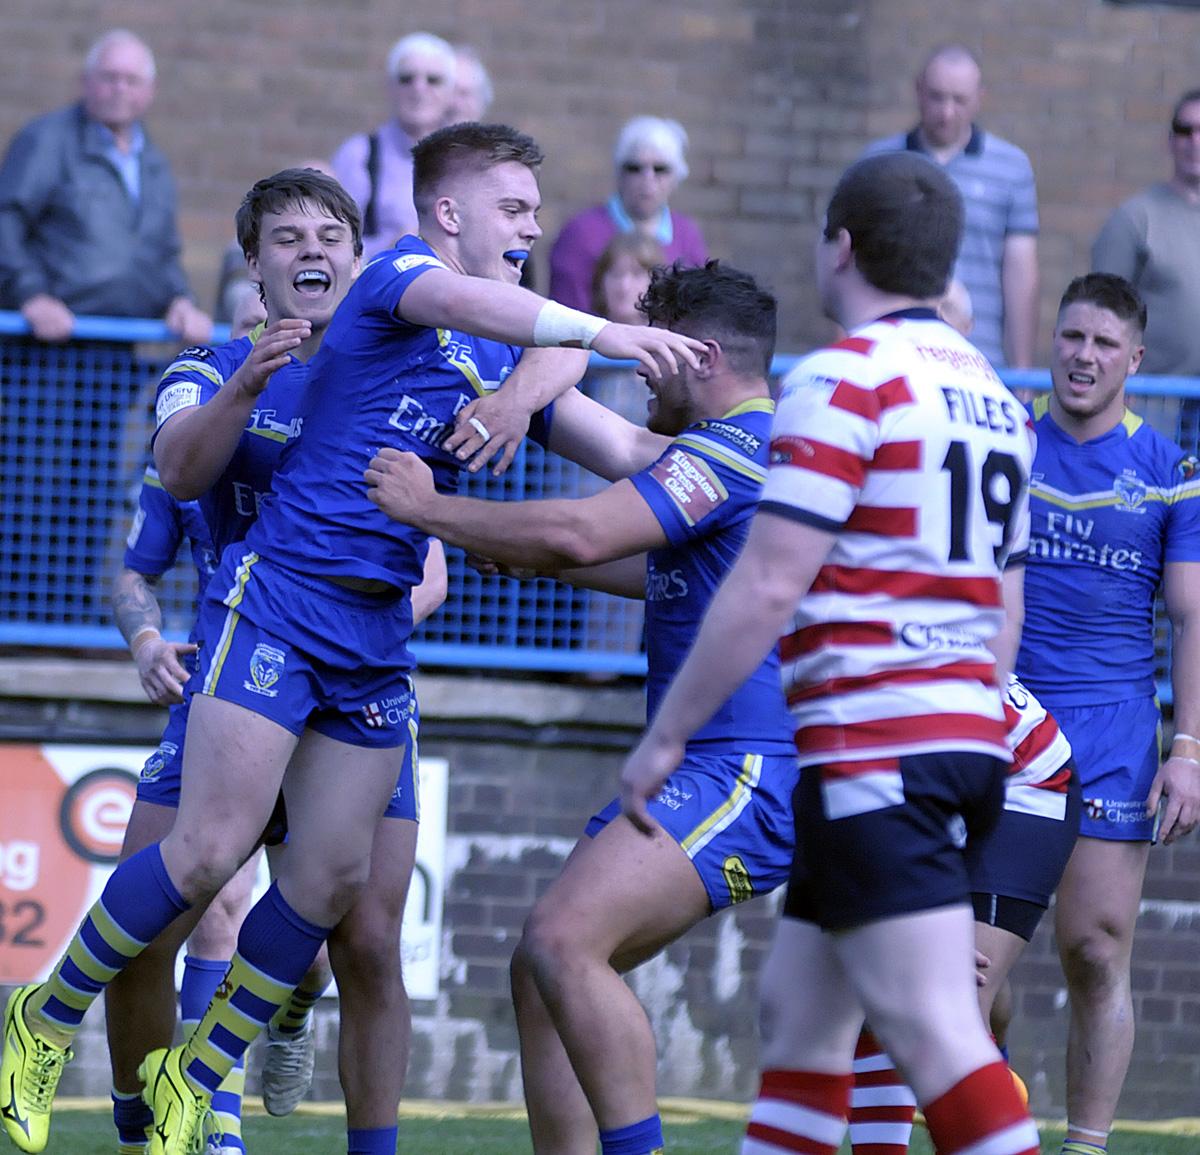 Action from Challenge Cup sixth-round tie at Bower Fold. Pictures by Mike Boden